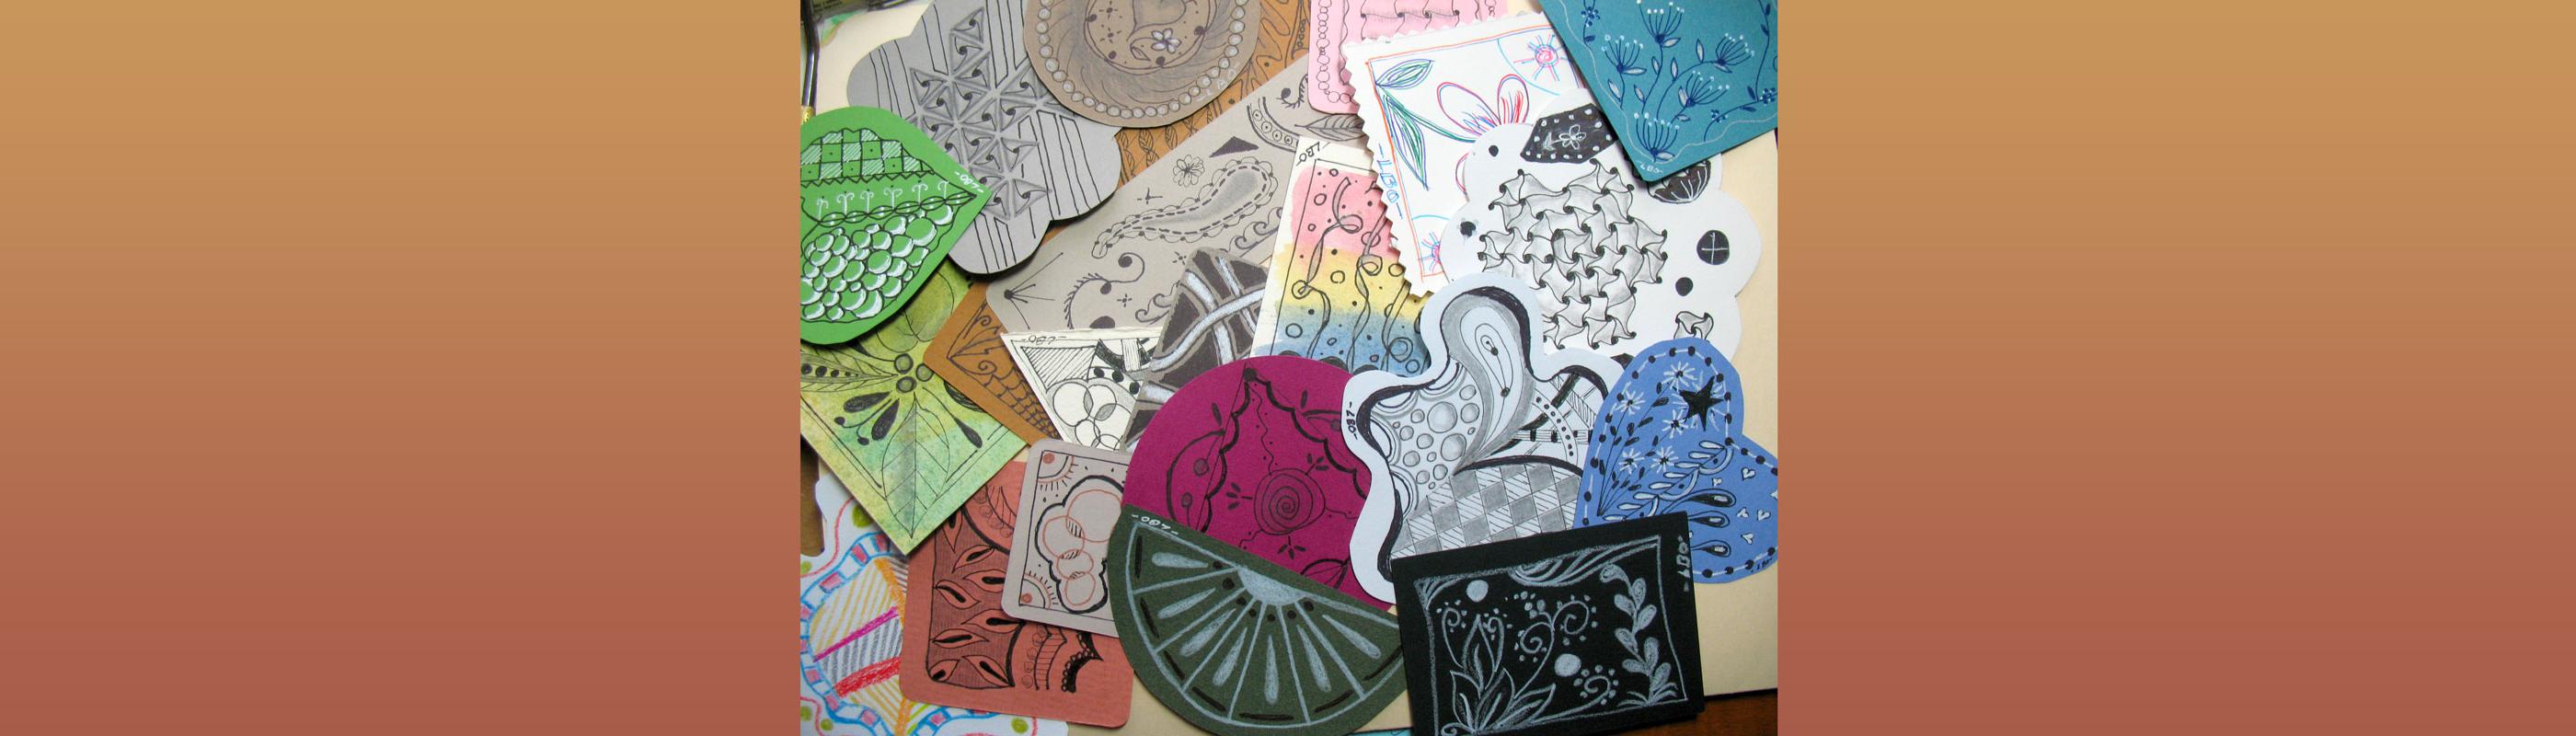 Small pieces of paper art with hand-drawn decorative designs